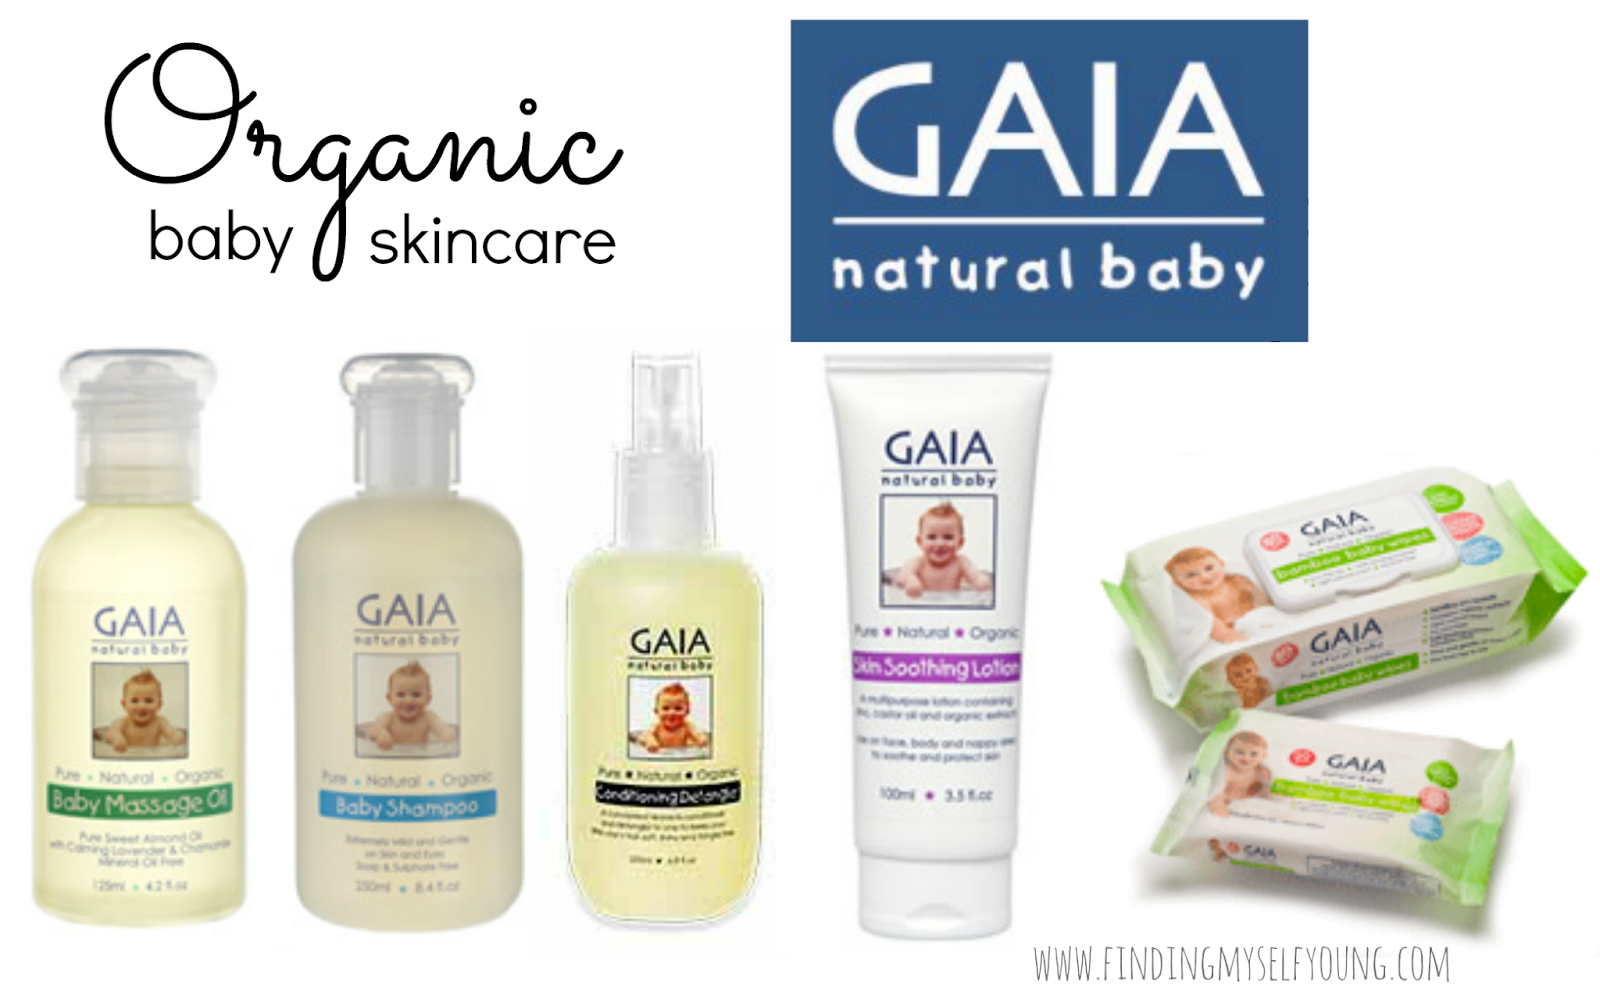 gaia organic natural baby skincare products